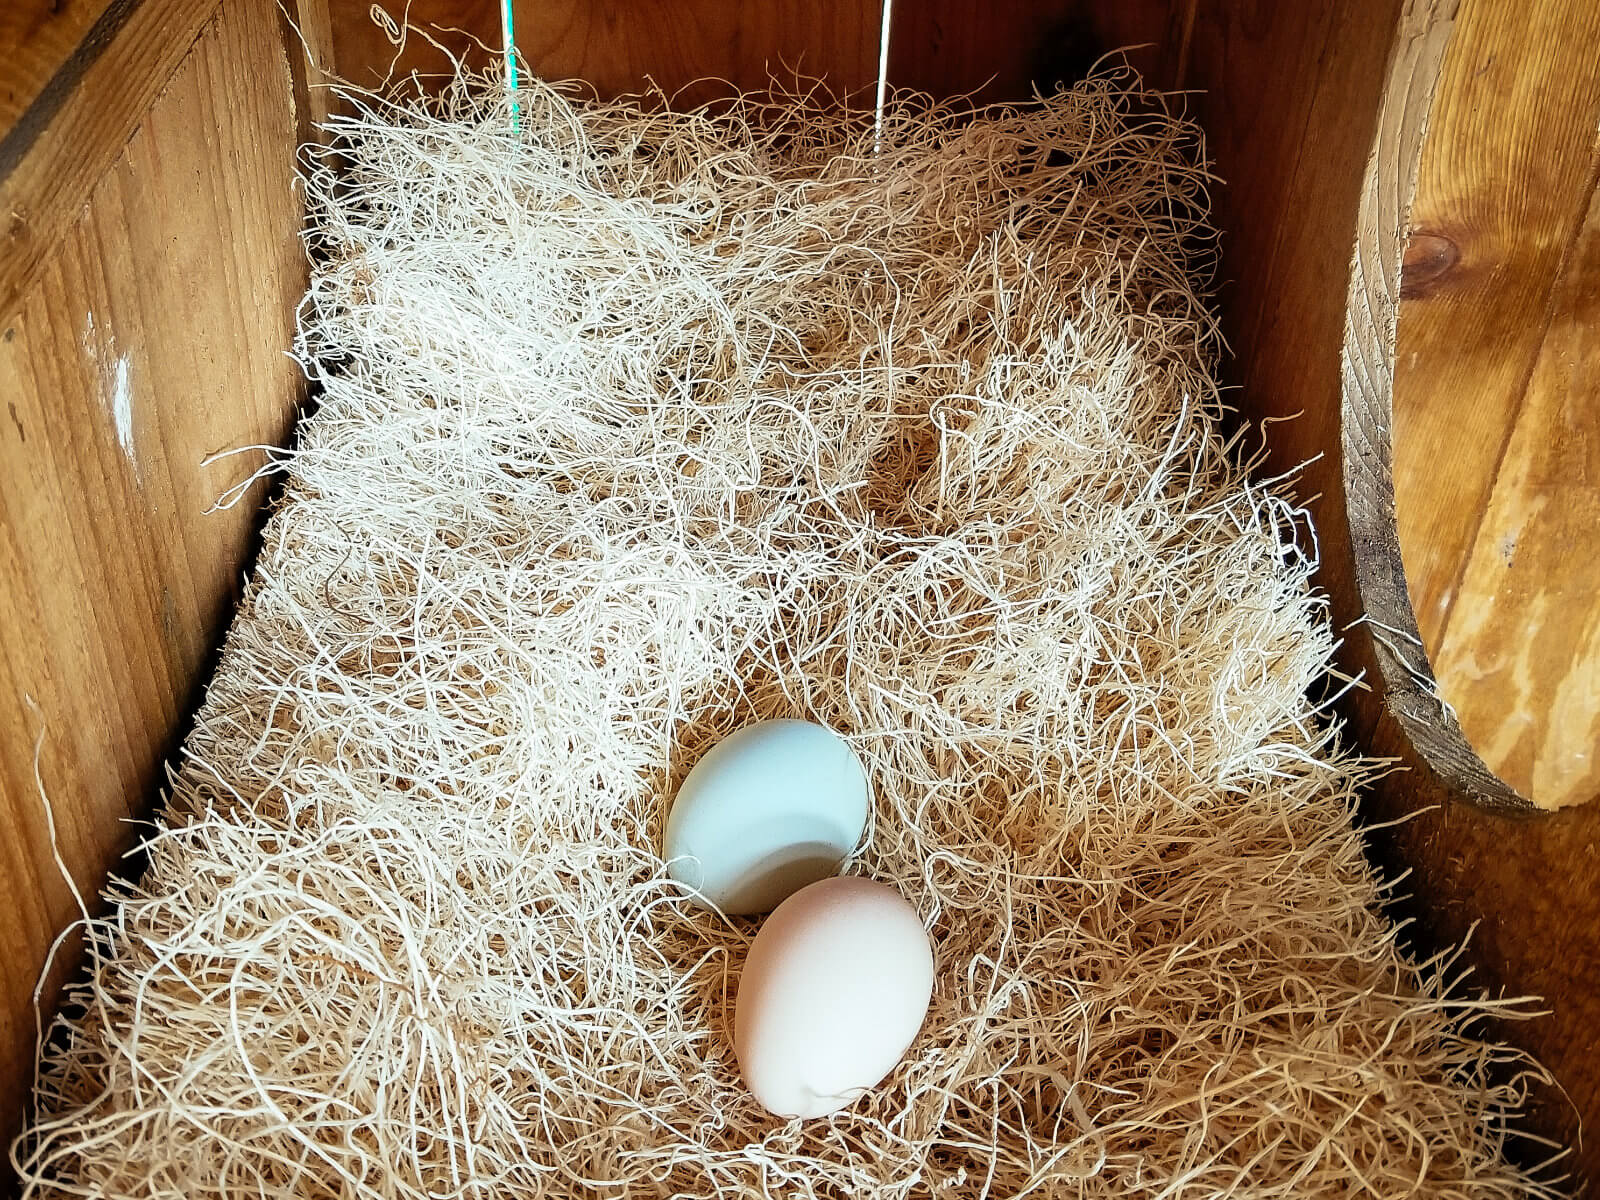 Eggs in a nesting box contain the bloom to keep bacteria from entering the eggs